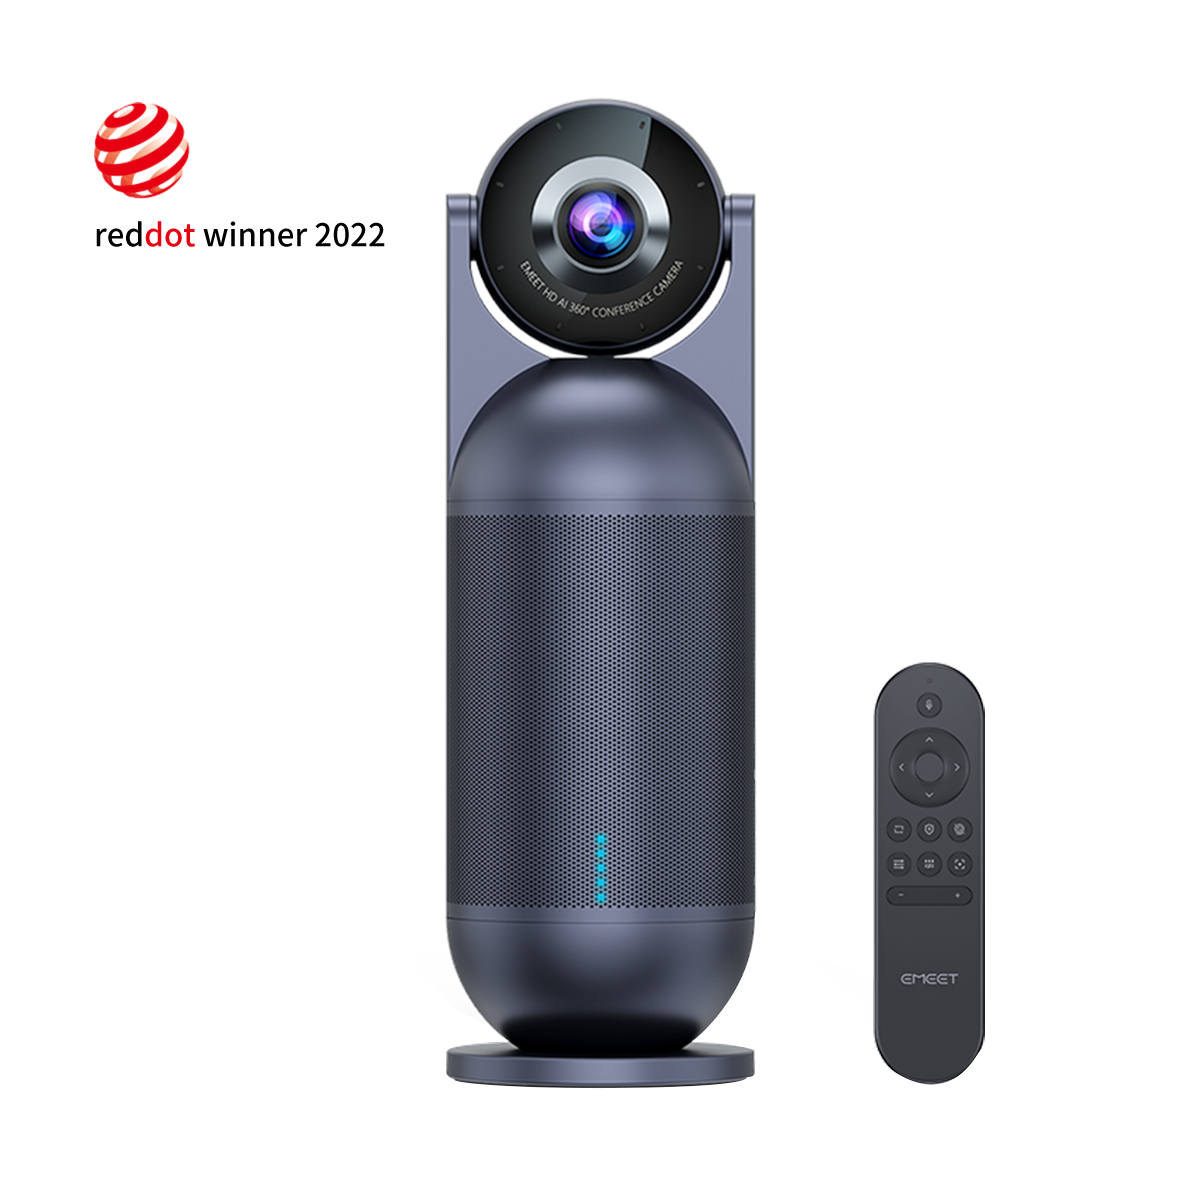 EMEET Meeting Capsule, 4K Captured 1080P Output 360°Video Conference Camera  8 Mics, 5 Video Modes, AI Voice/Face/Figure Tracked Room Webcam w/Remote